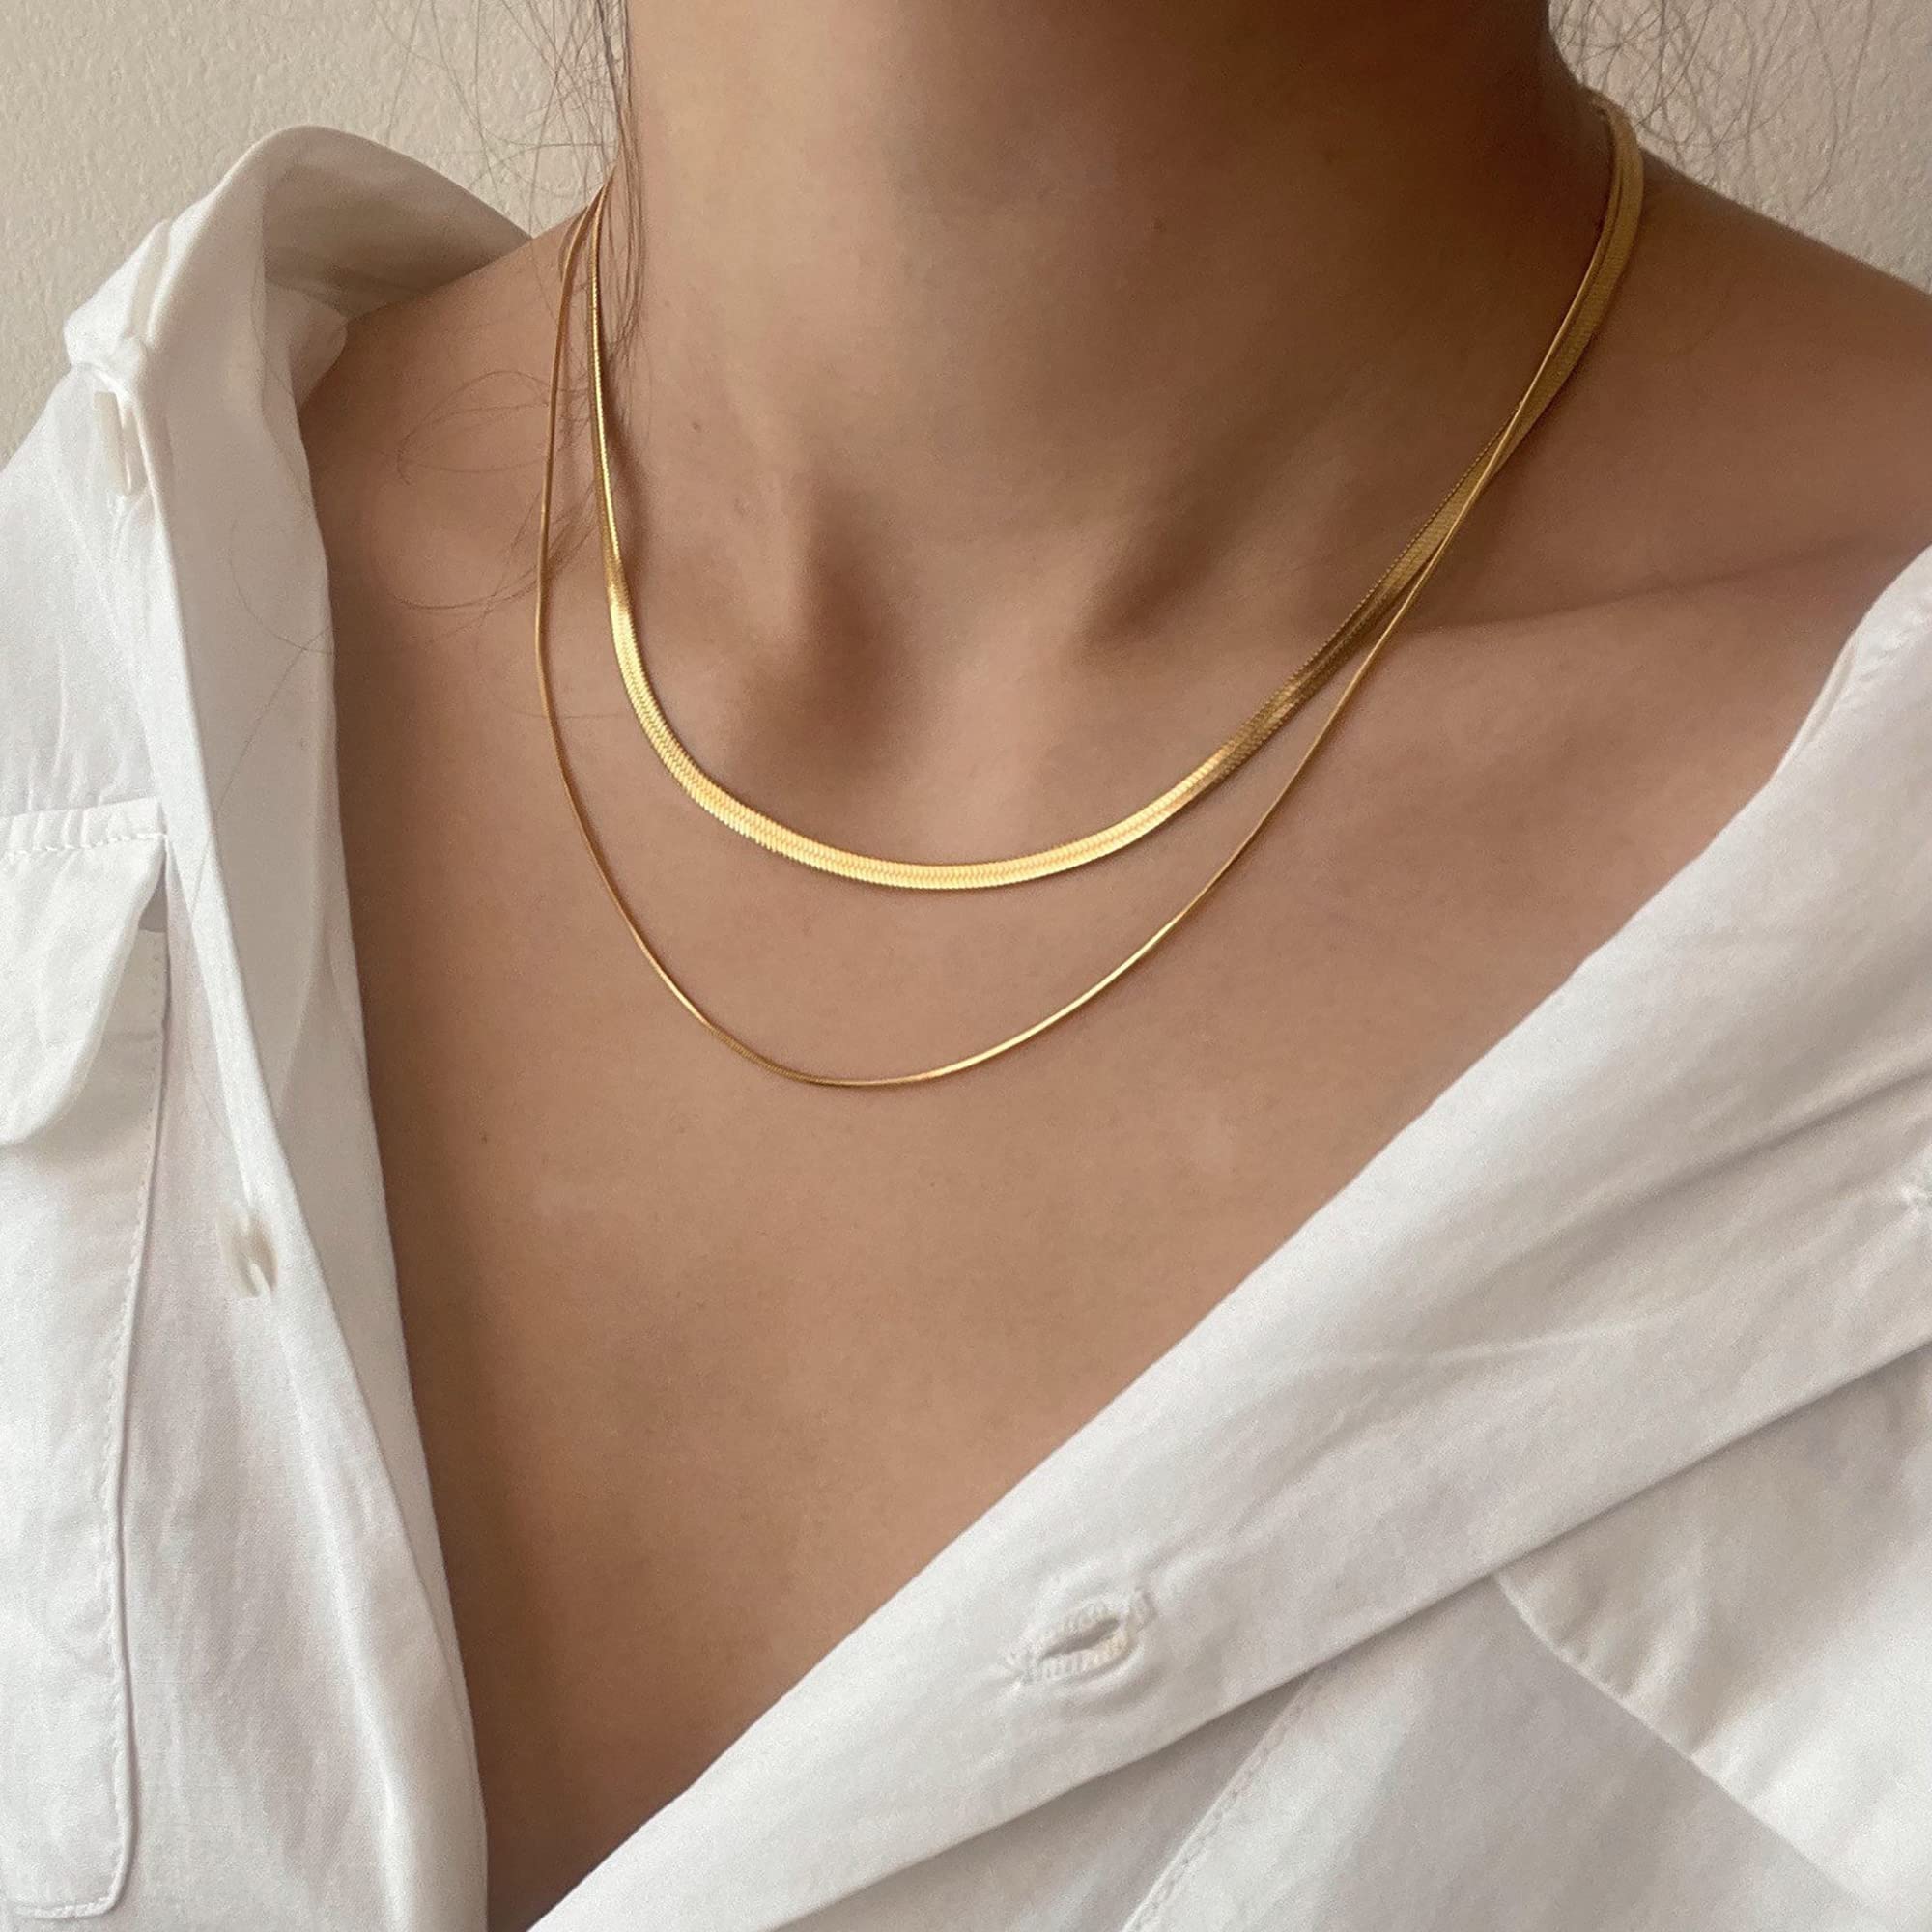 CHESKY 14K Gold/Silver Plated Snake Chain Necklace Herringbone Necklace Gold Choker Necklaces for Women Girl Gifts Jewelry 1.5/3/5MM(W) 14